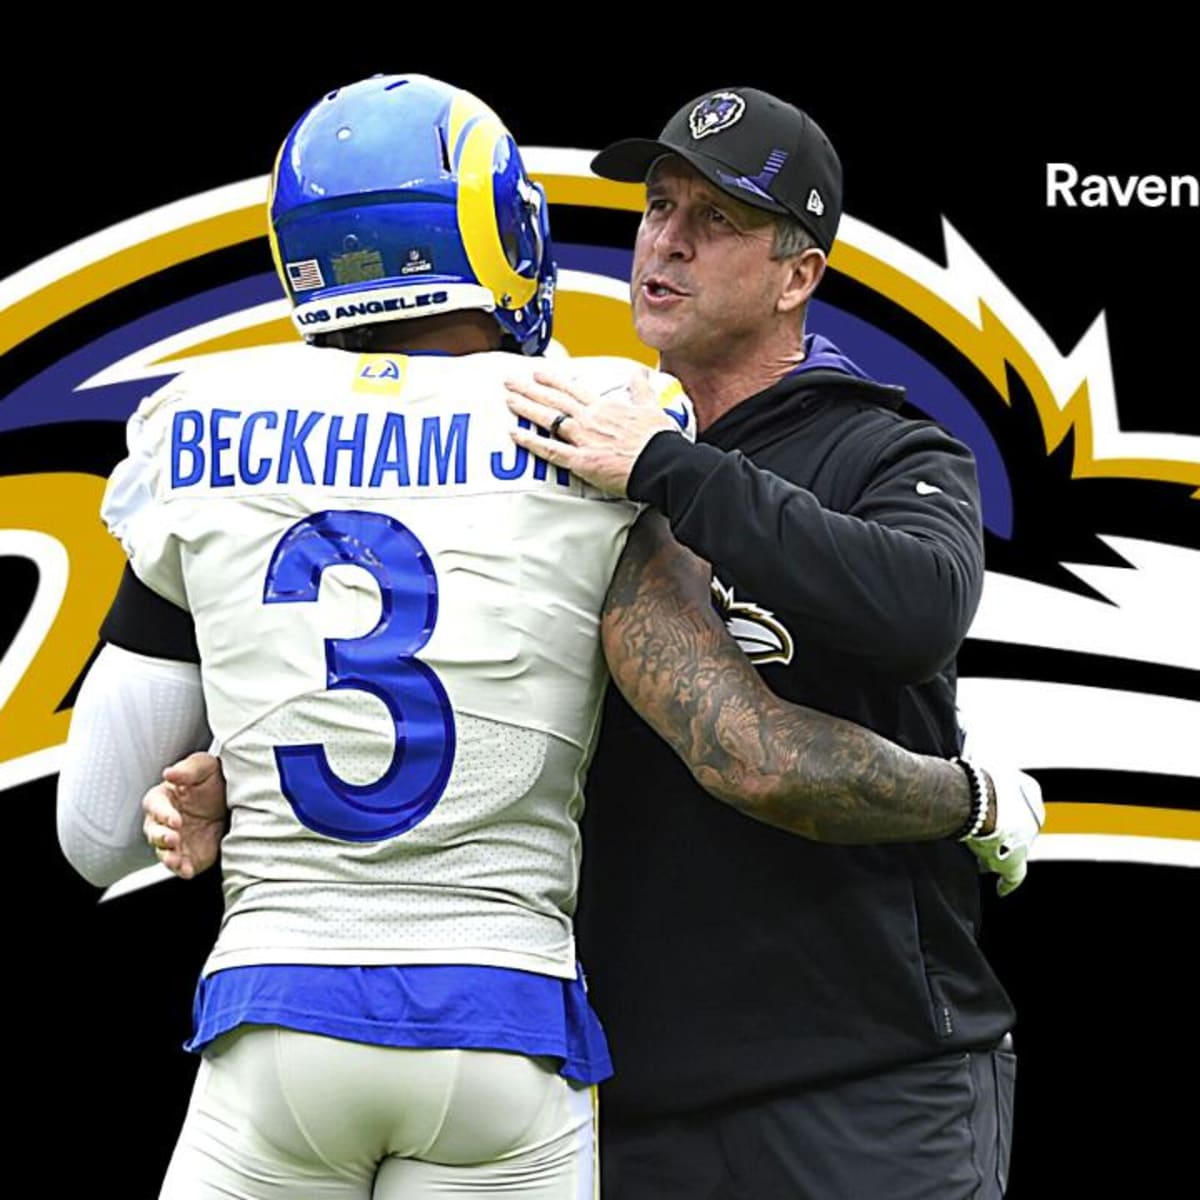 Lamar Jackson 'Trying To Get' Baltimore Ravens' WR OBJ a Touchdown - Sports  Illustrated Baltimore Ravens News, Analysis and More